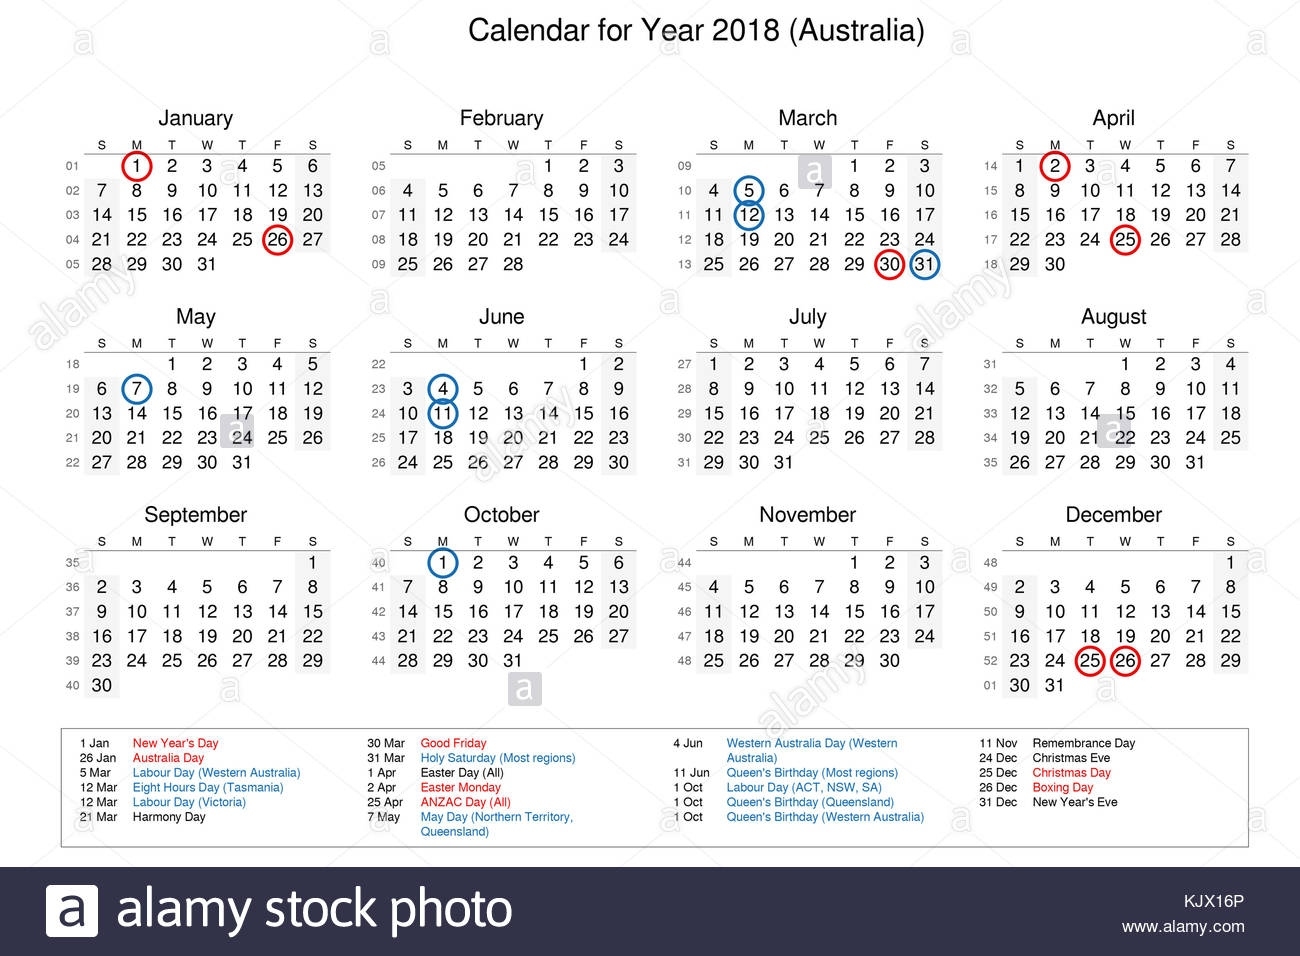 Calendar Of Year 2018 With Public Holidays And Bank Holidays For Calendar Public Holidays Australia